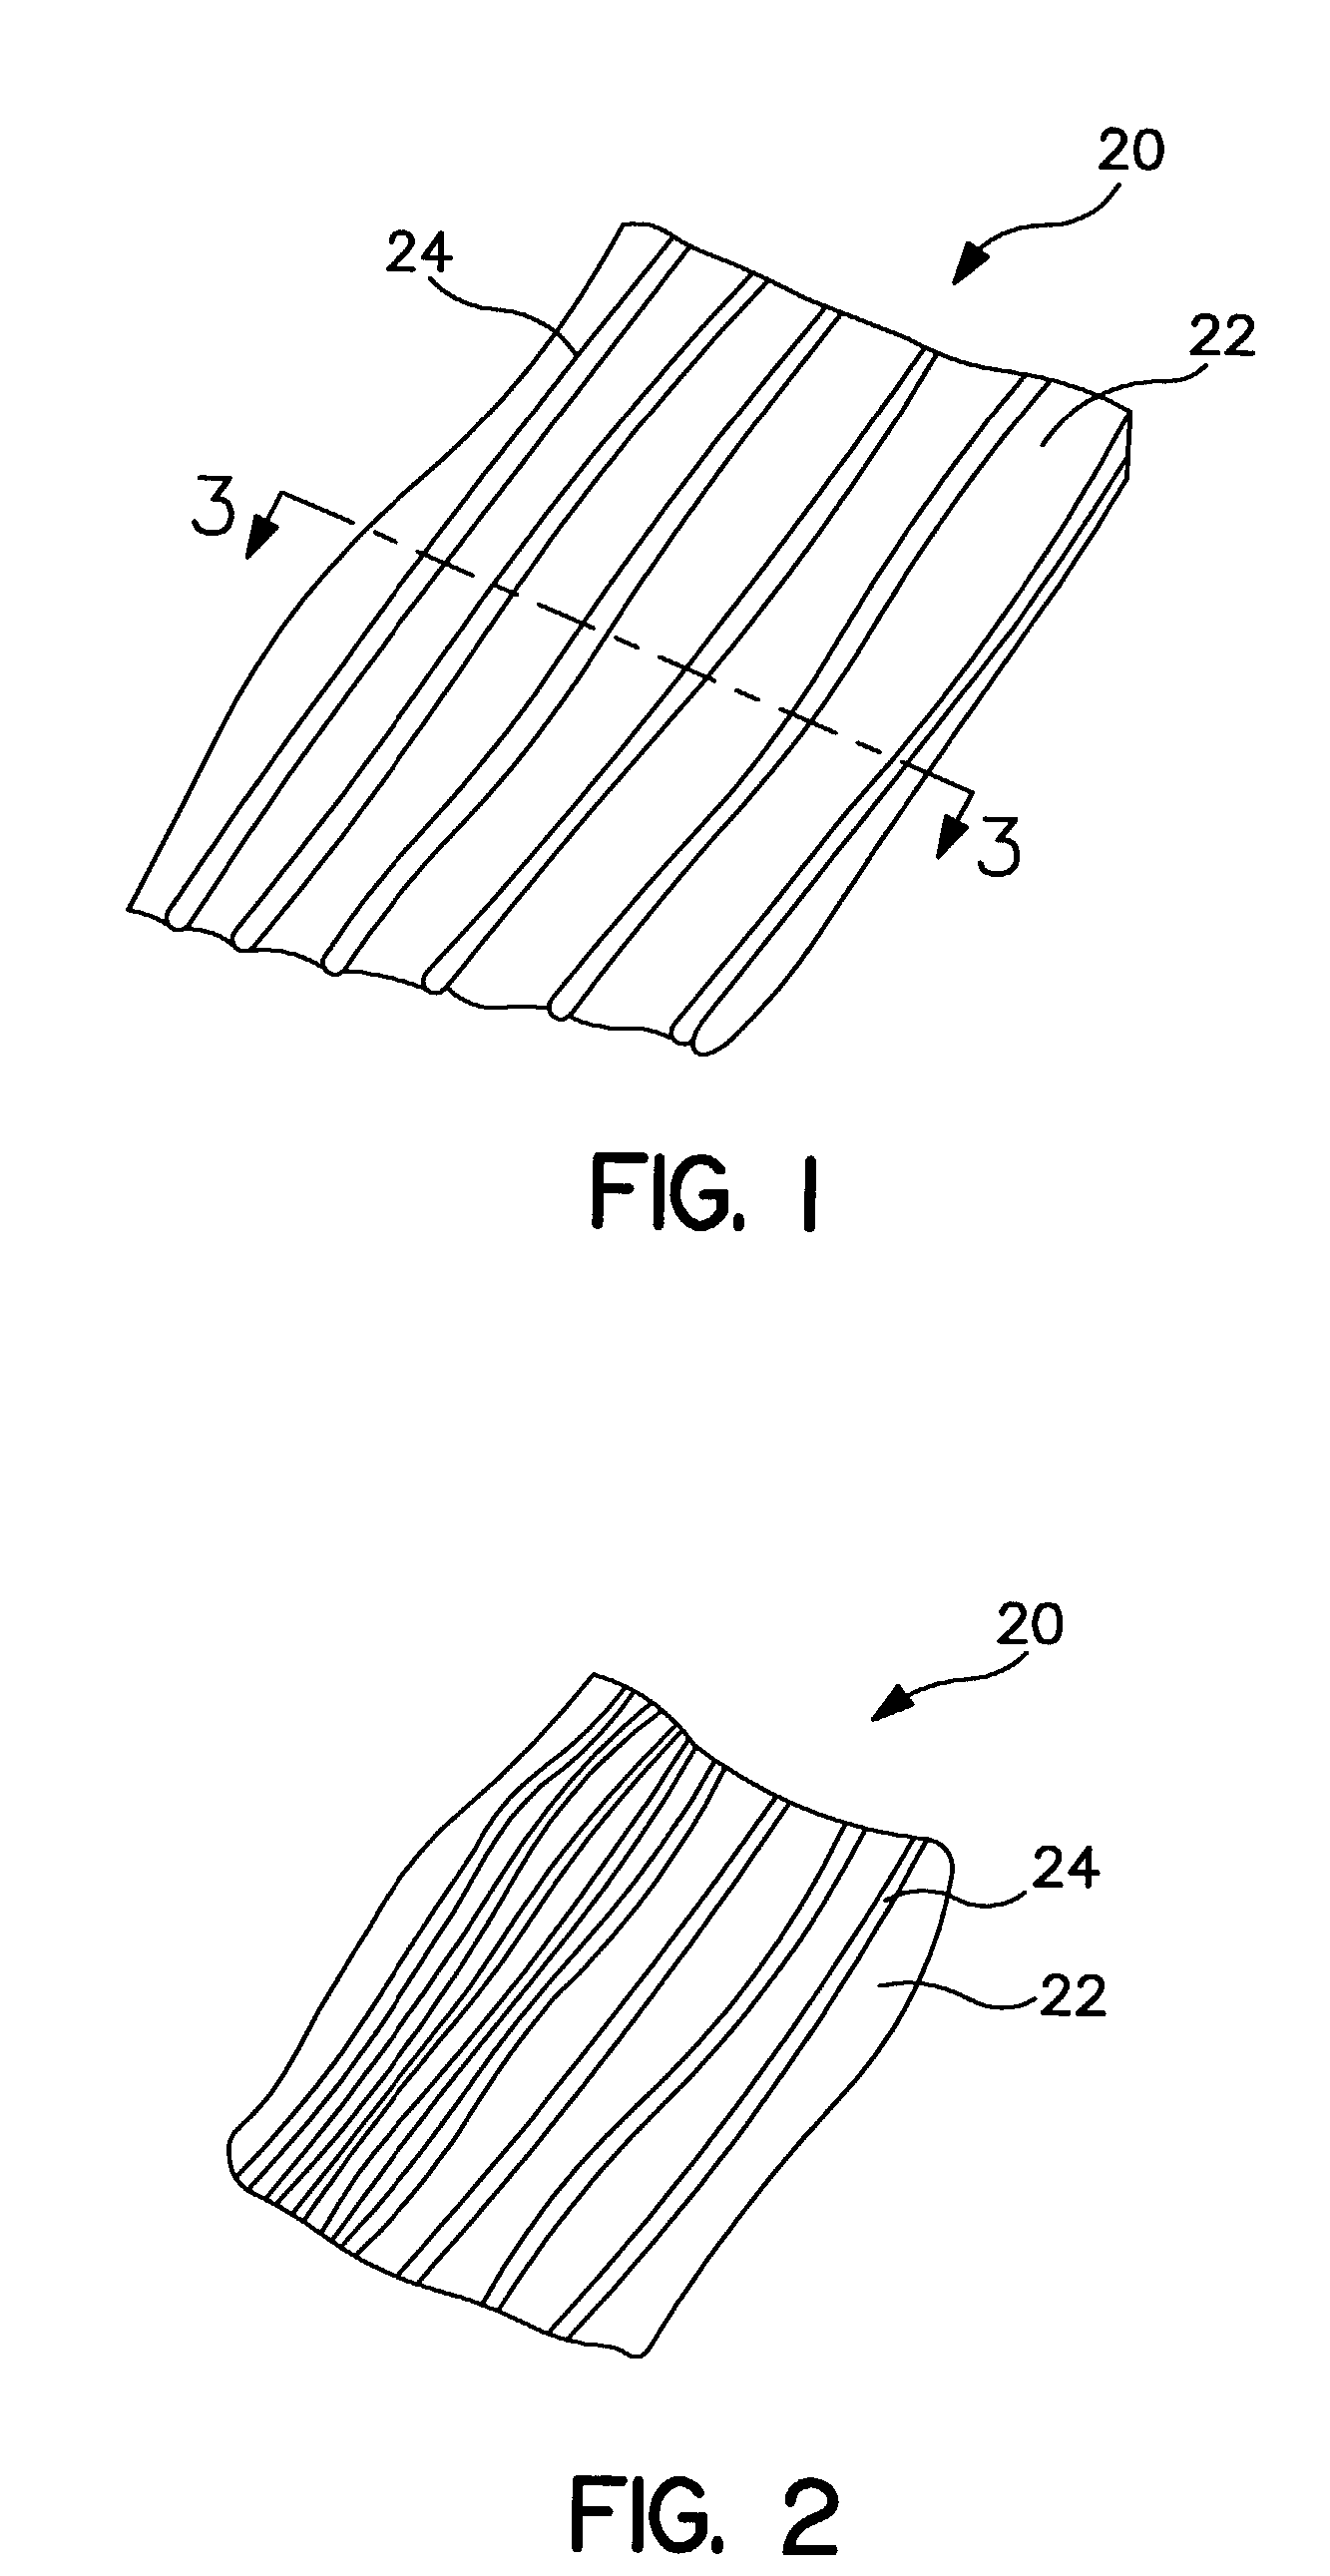 Strand-reinforced composite material